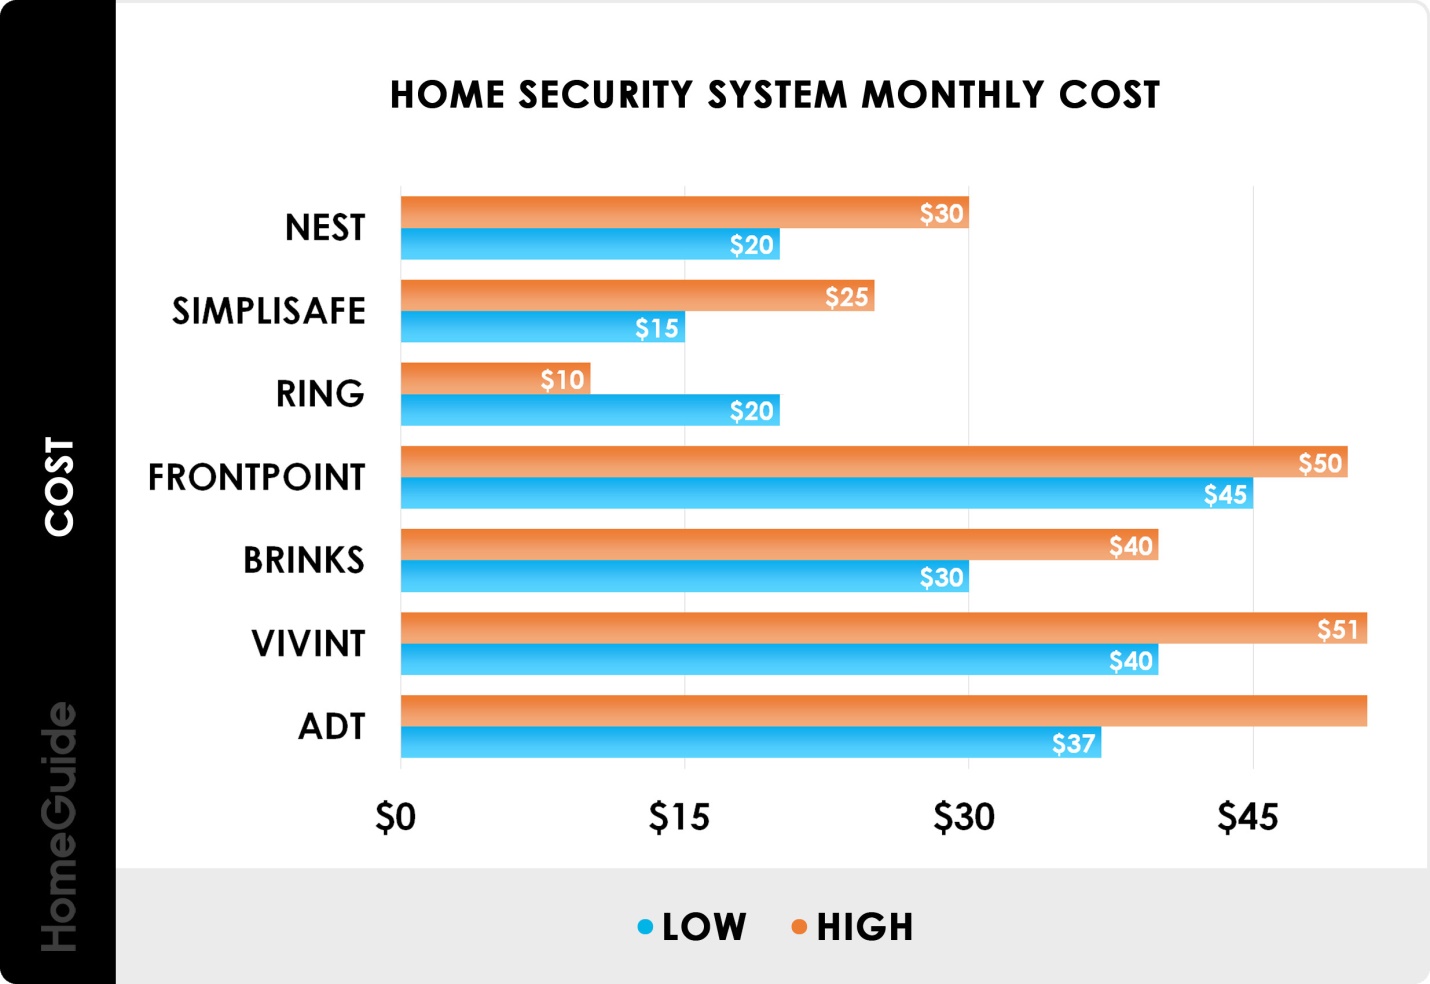 Security Cameras Monthly Cost Hot Sale, 55% OFF | www.ingeniovirtual.com